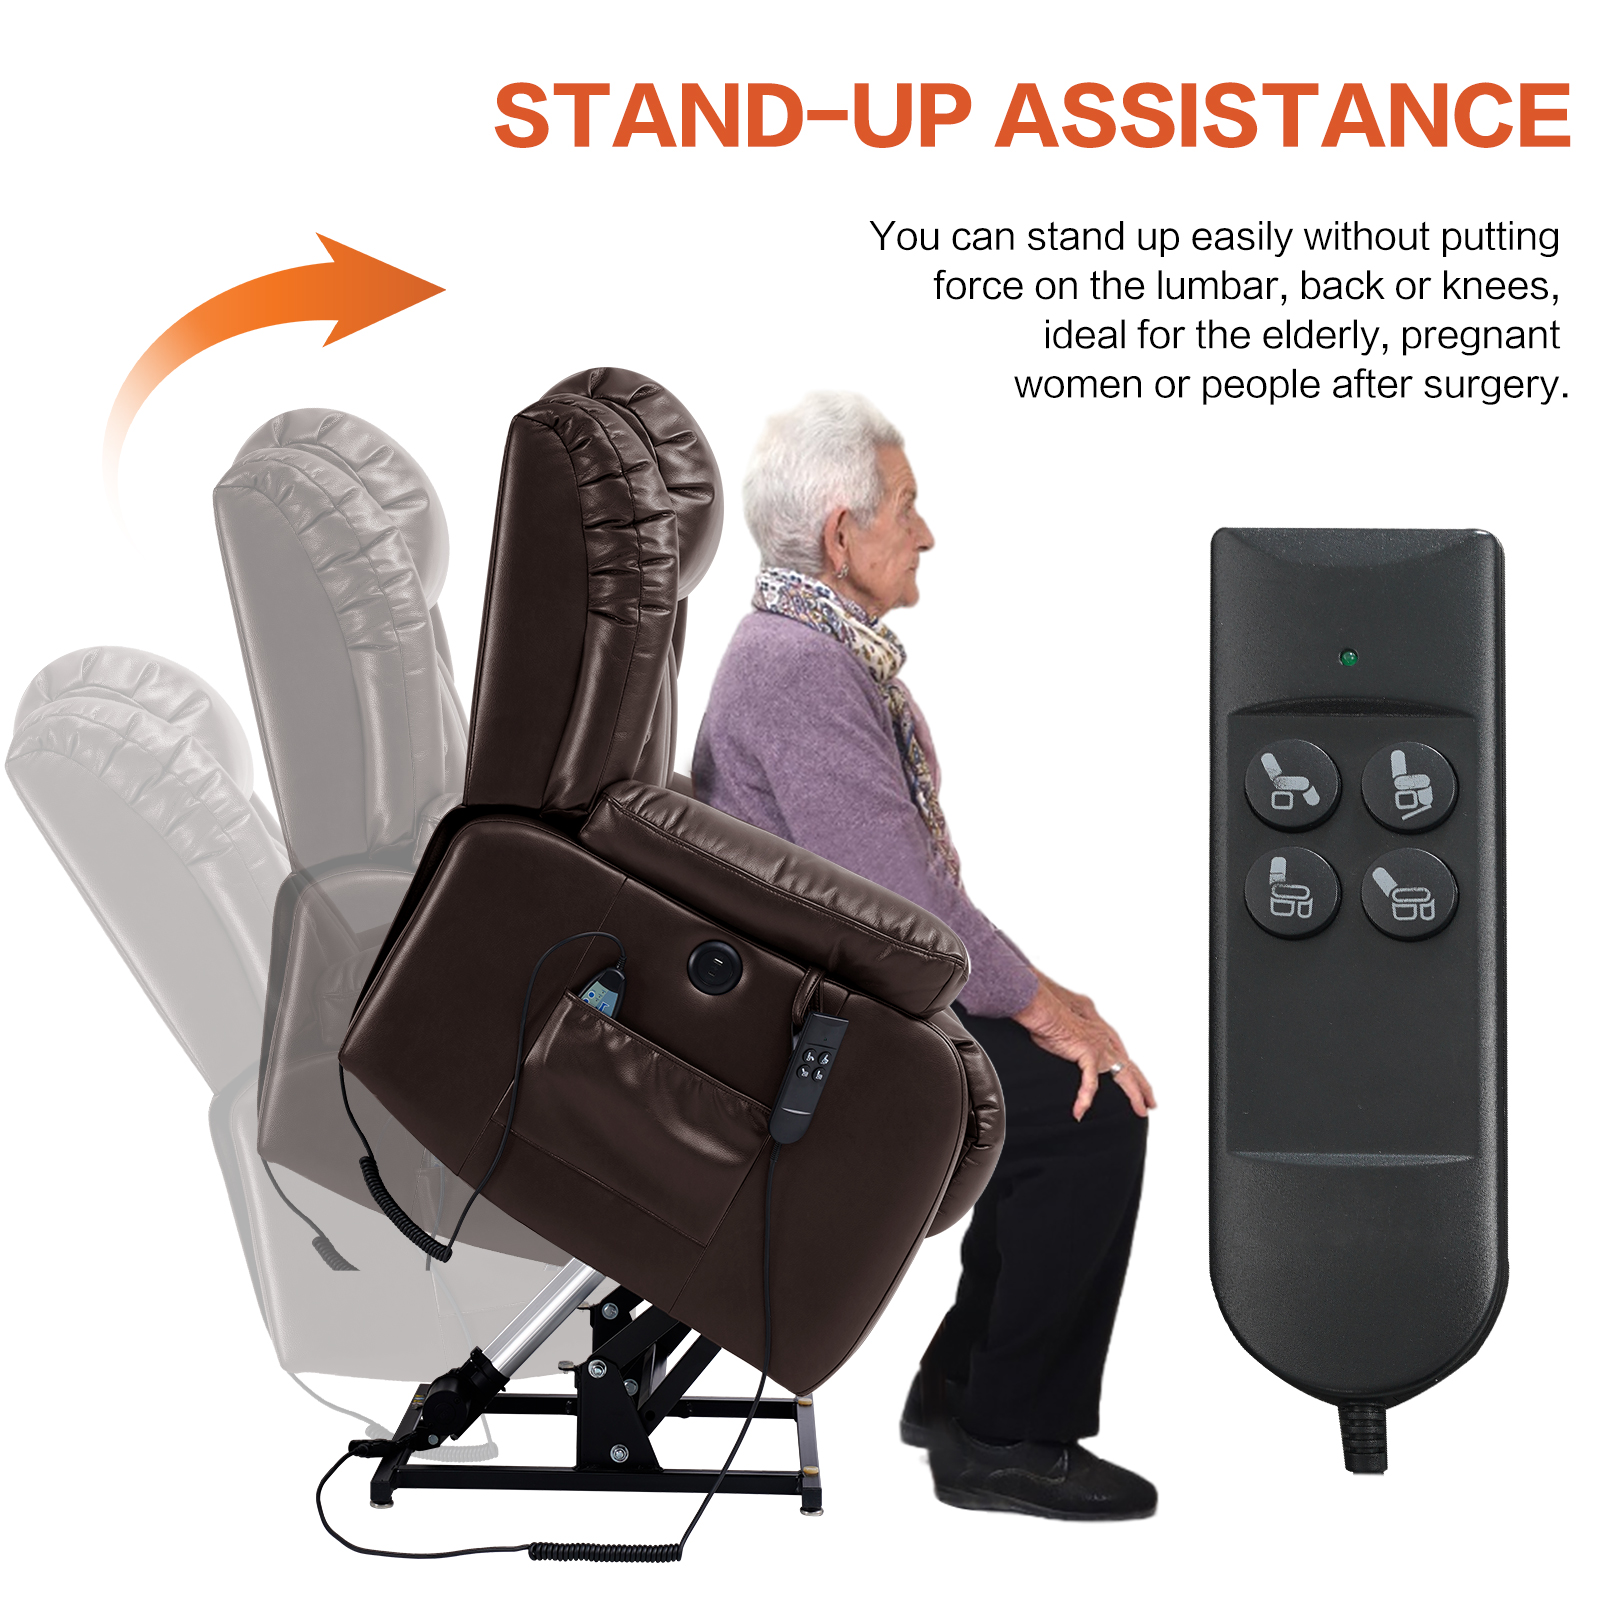 TEKAMON Infinite Position Lift Recliner Chair for Elderly with Heat and Massage Lay Flat Sleeping Leather Dual Motor Power Lift Chair for Living Room (Brown) - image 4 of 12